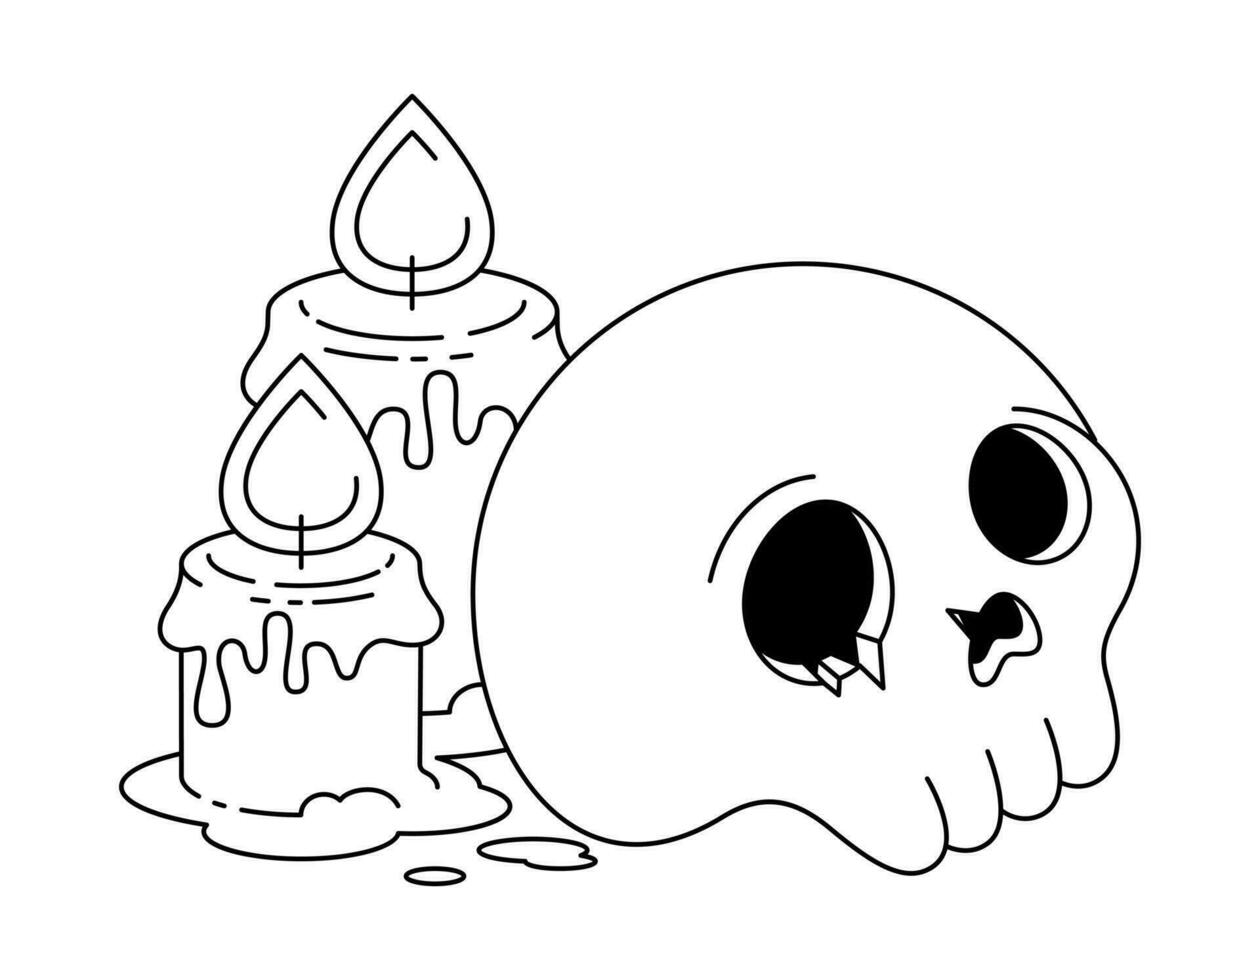 Outline Vector Kawaii Illustration of Cute Skull and Candles for Coloring Pages